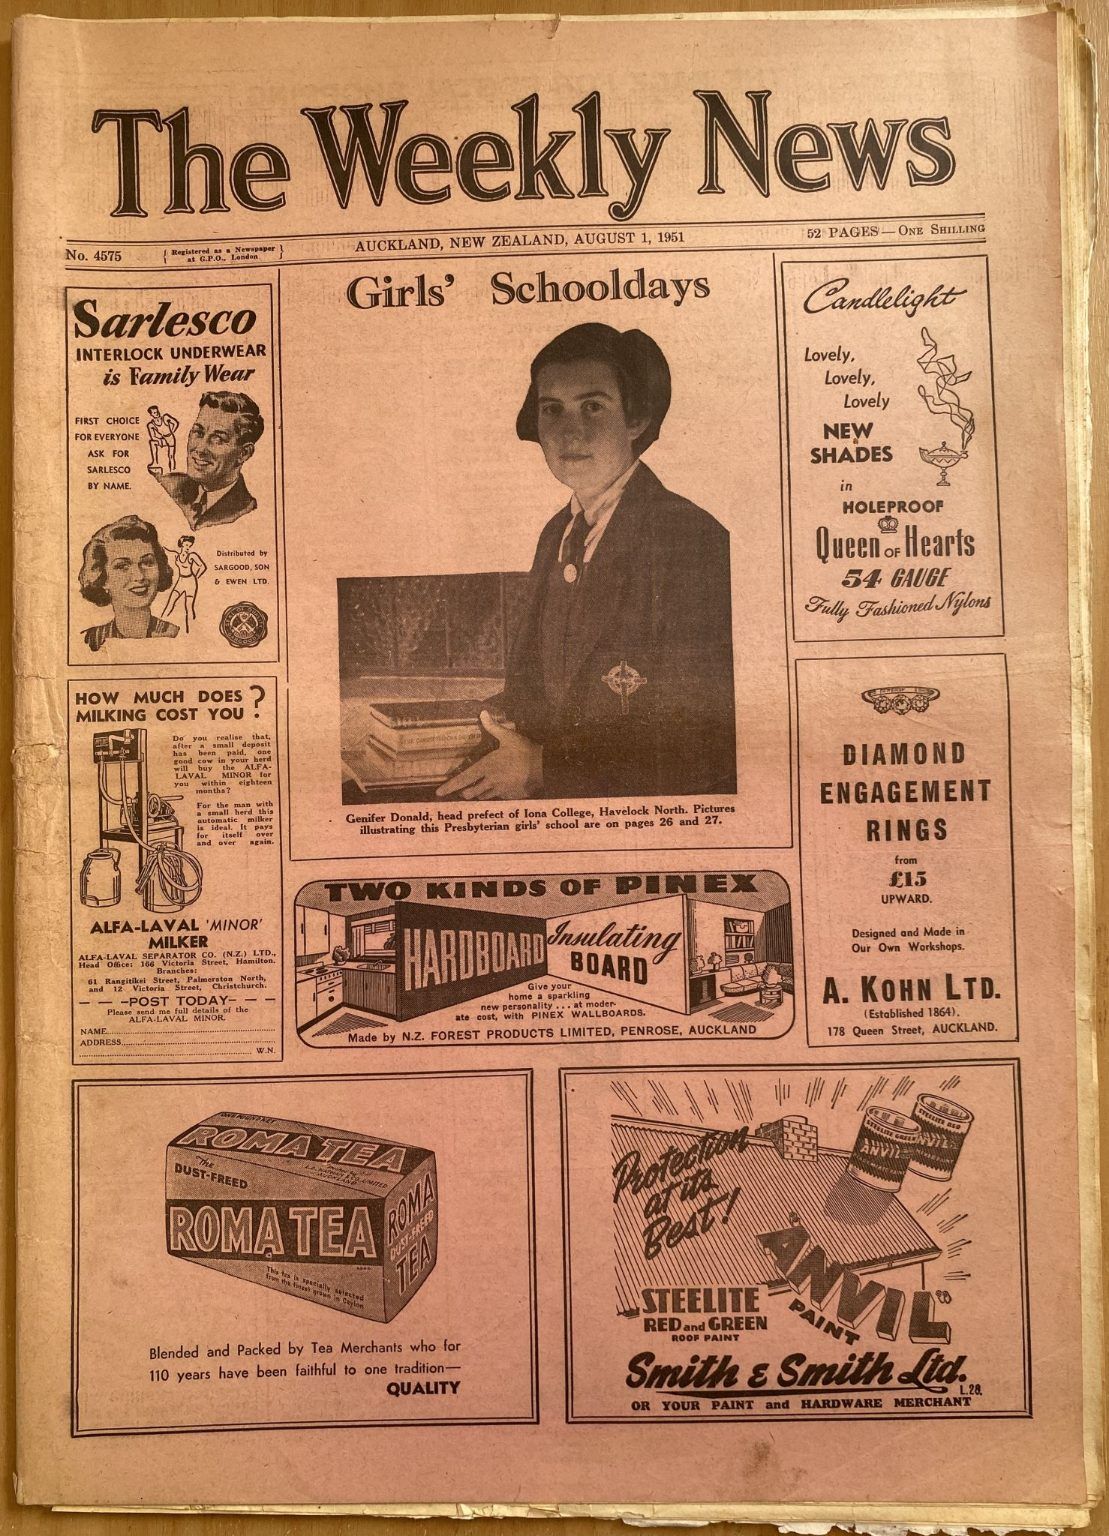 OLD NEWSPAPER: The Weekly News, No. 4575, 1 August 1951